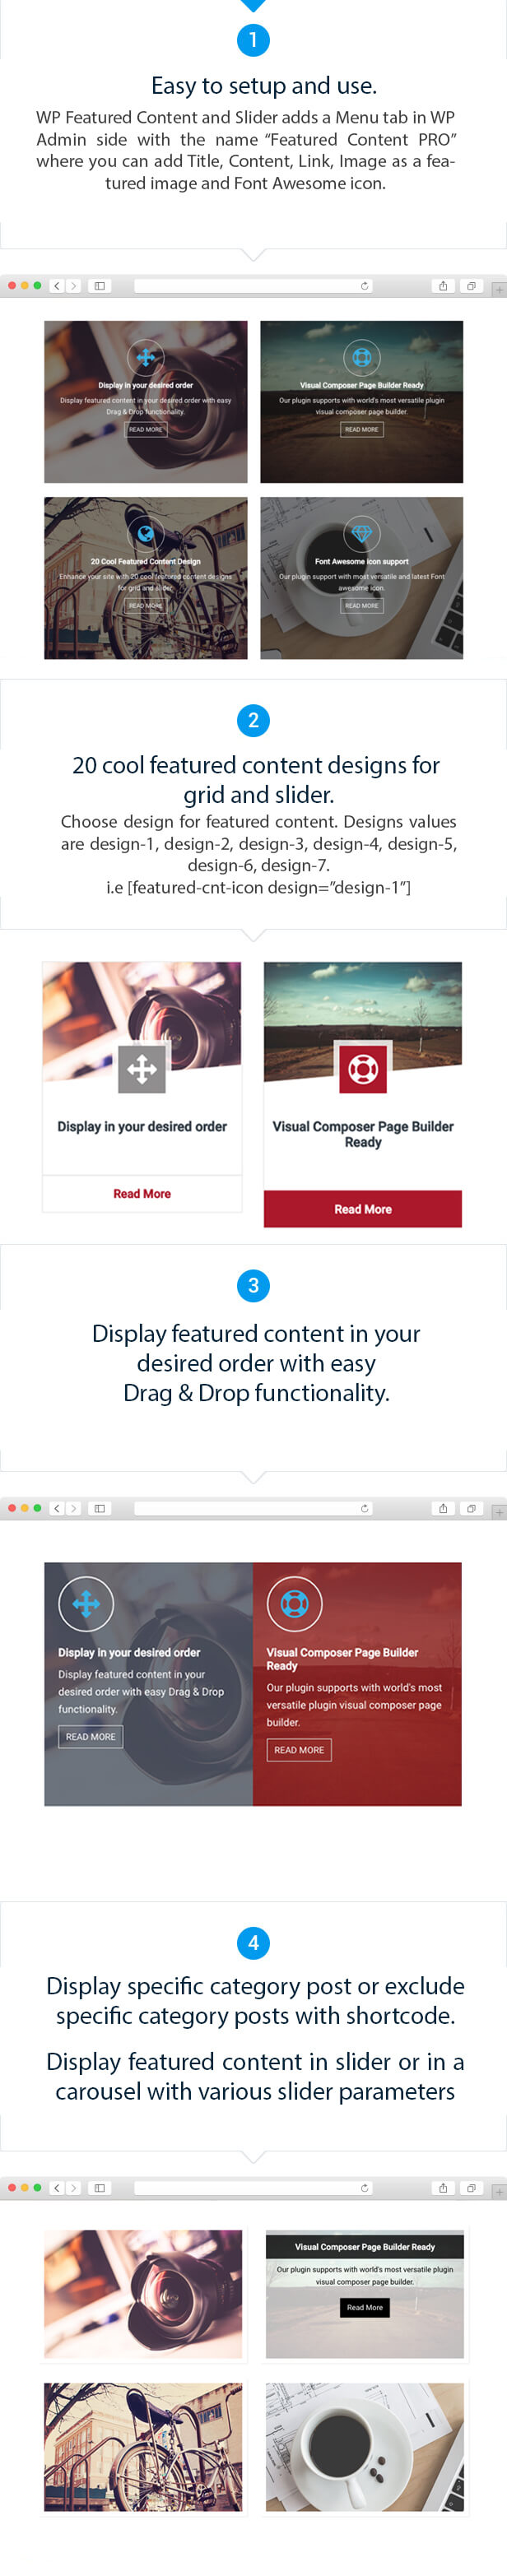 Featured Content and Slider Pro Features